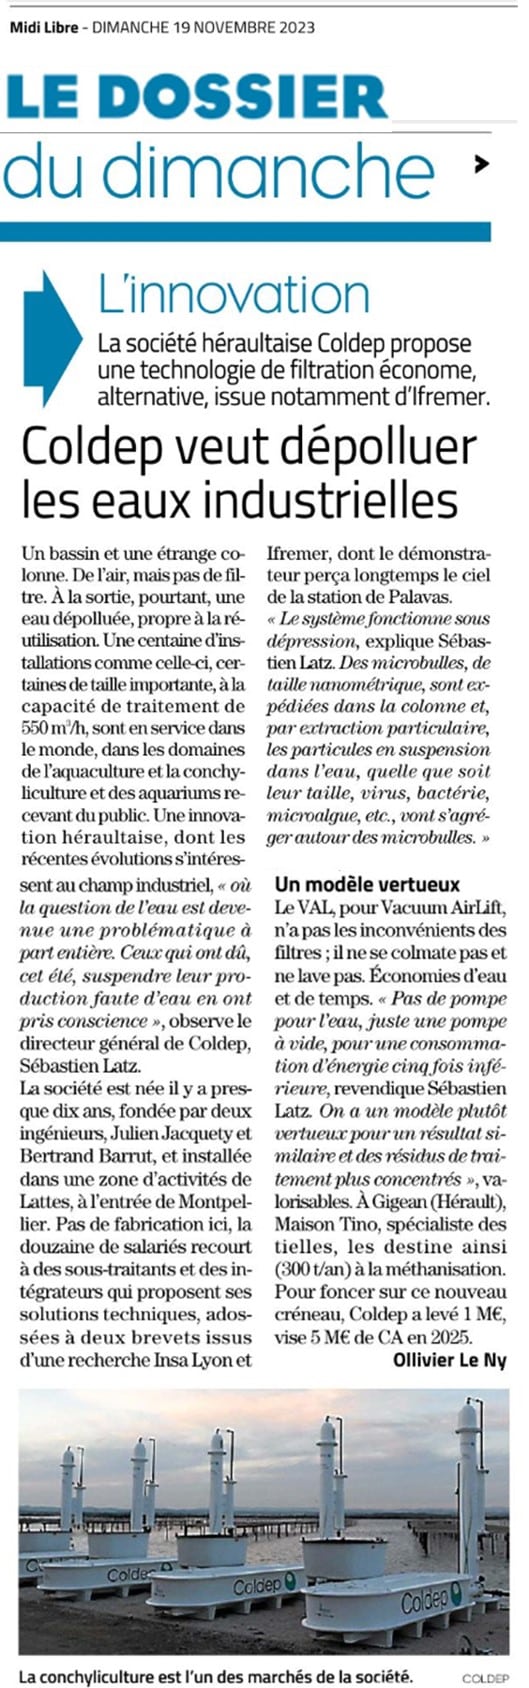 Midi Libre article on Coldep, a nugget of cleantech